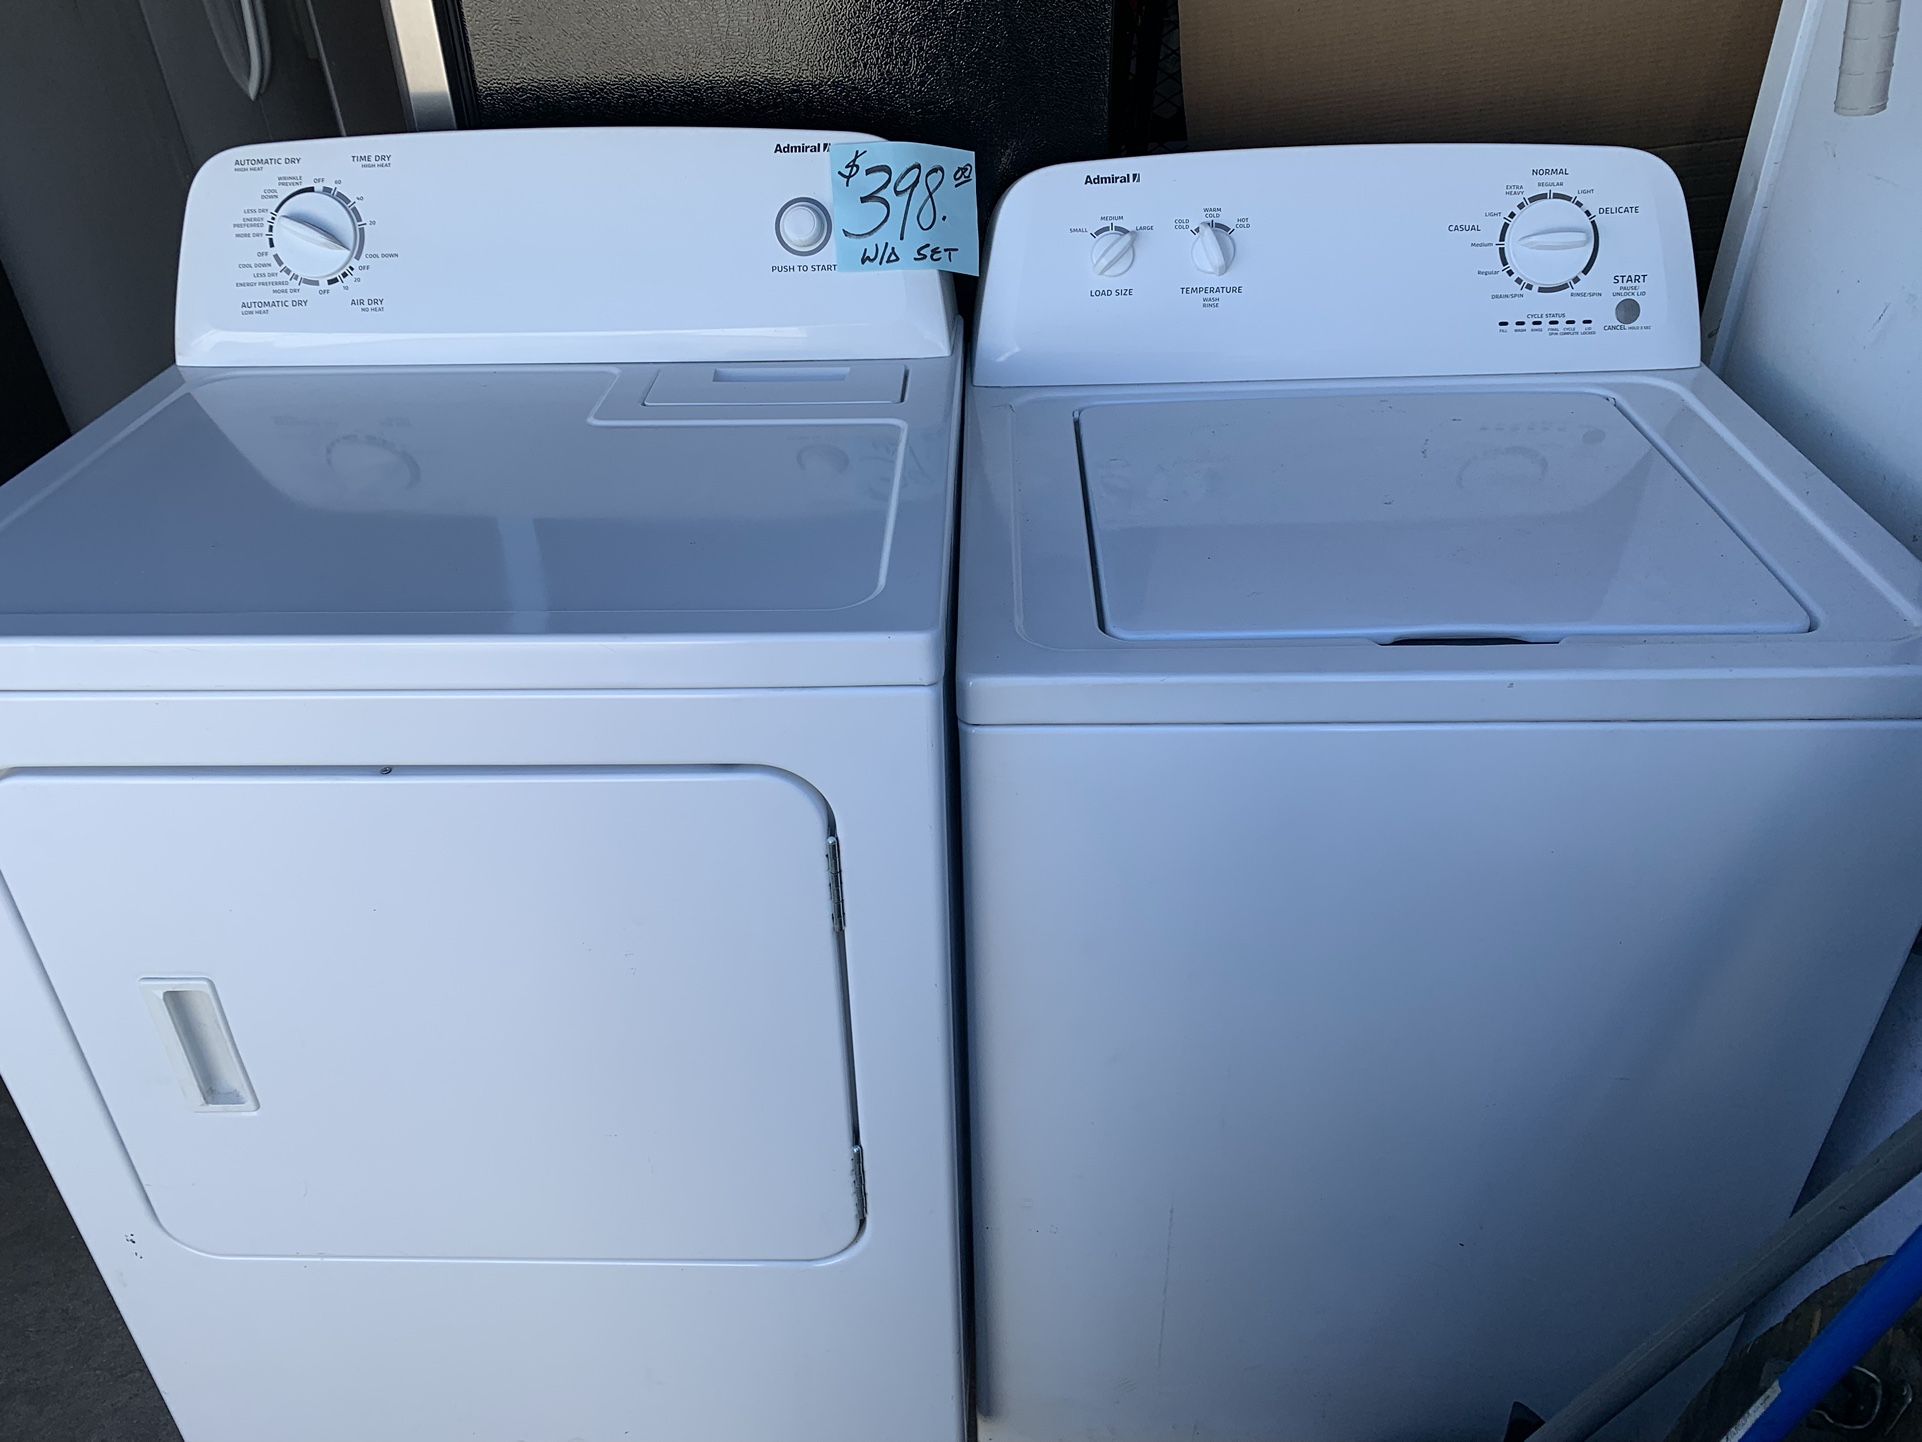 Admiral Washer And Dryer Excellent . Warehouse pricing.  Warranty . Delivery Available . 2522 Market st. 33901